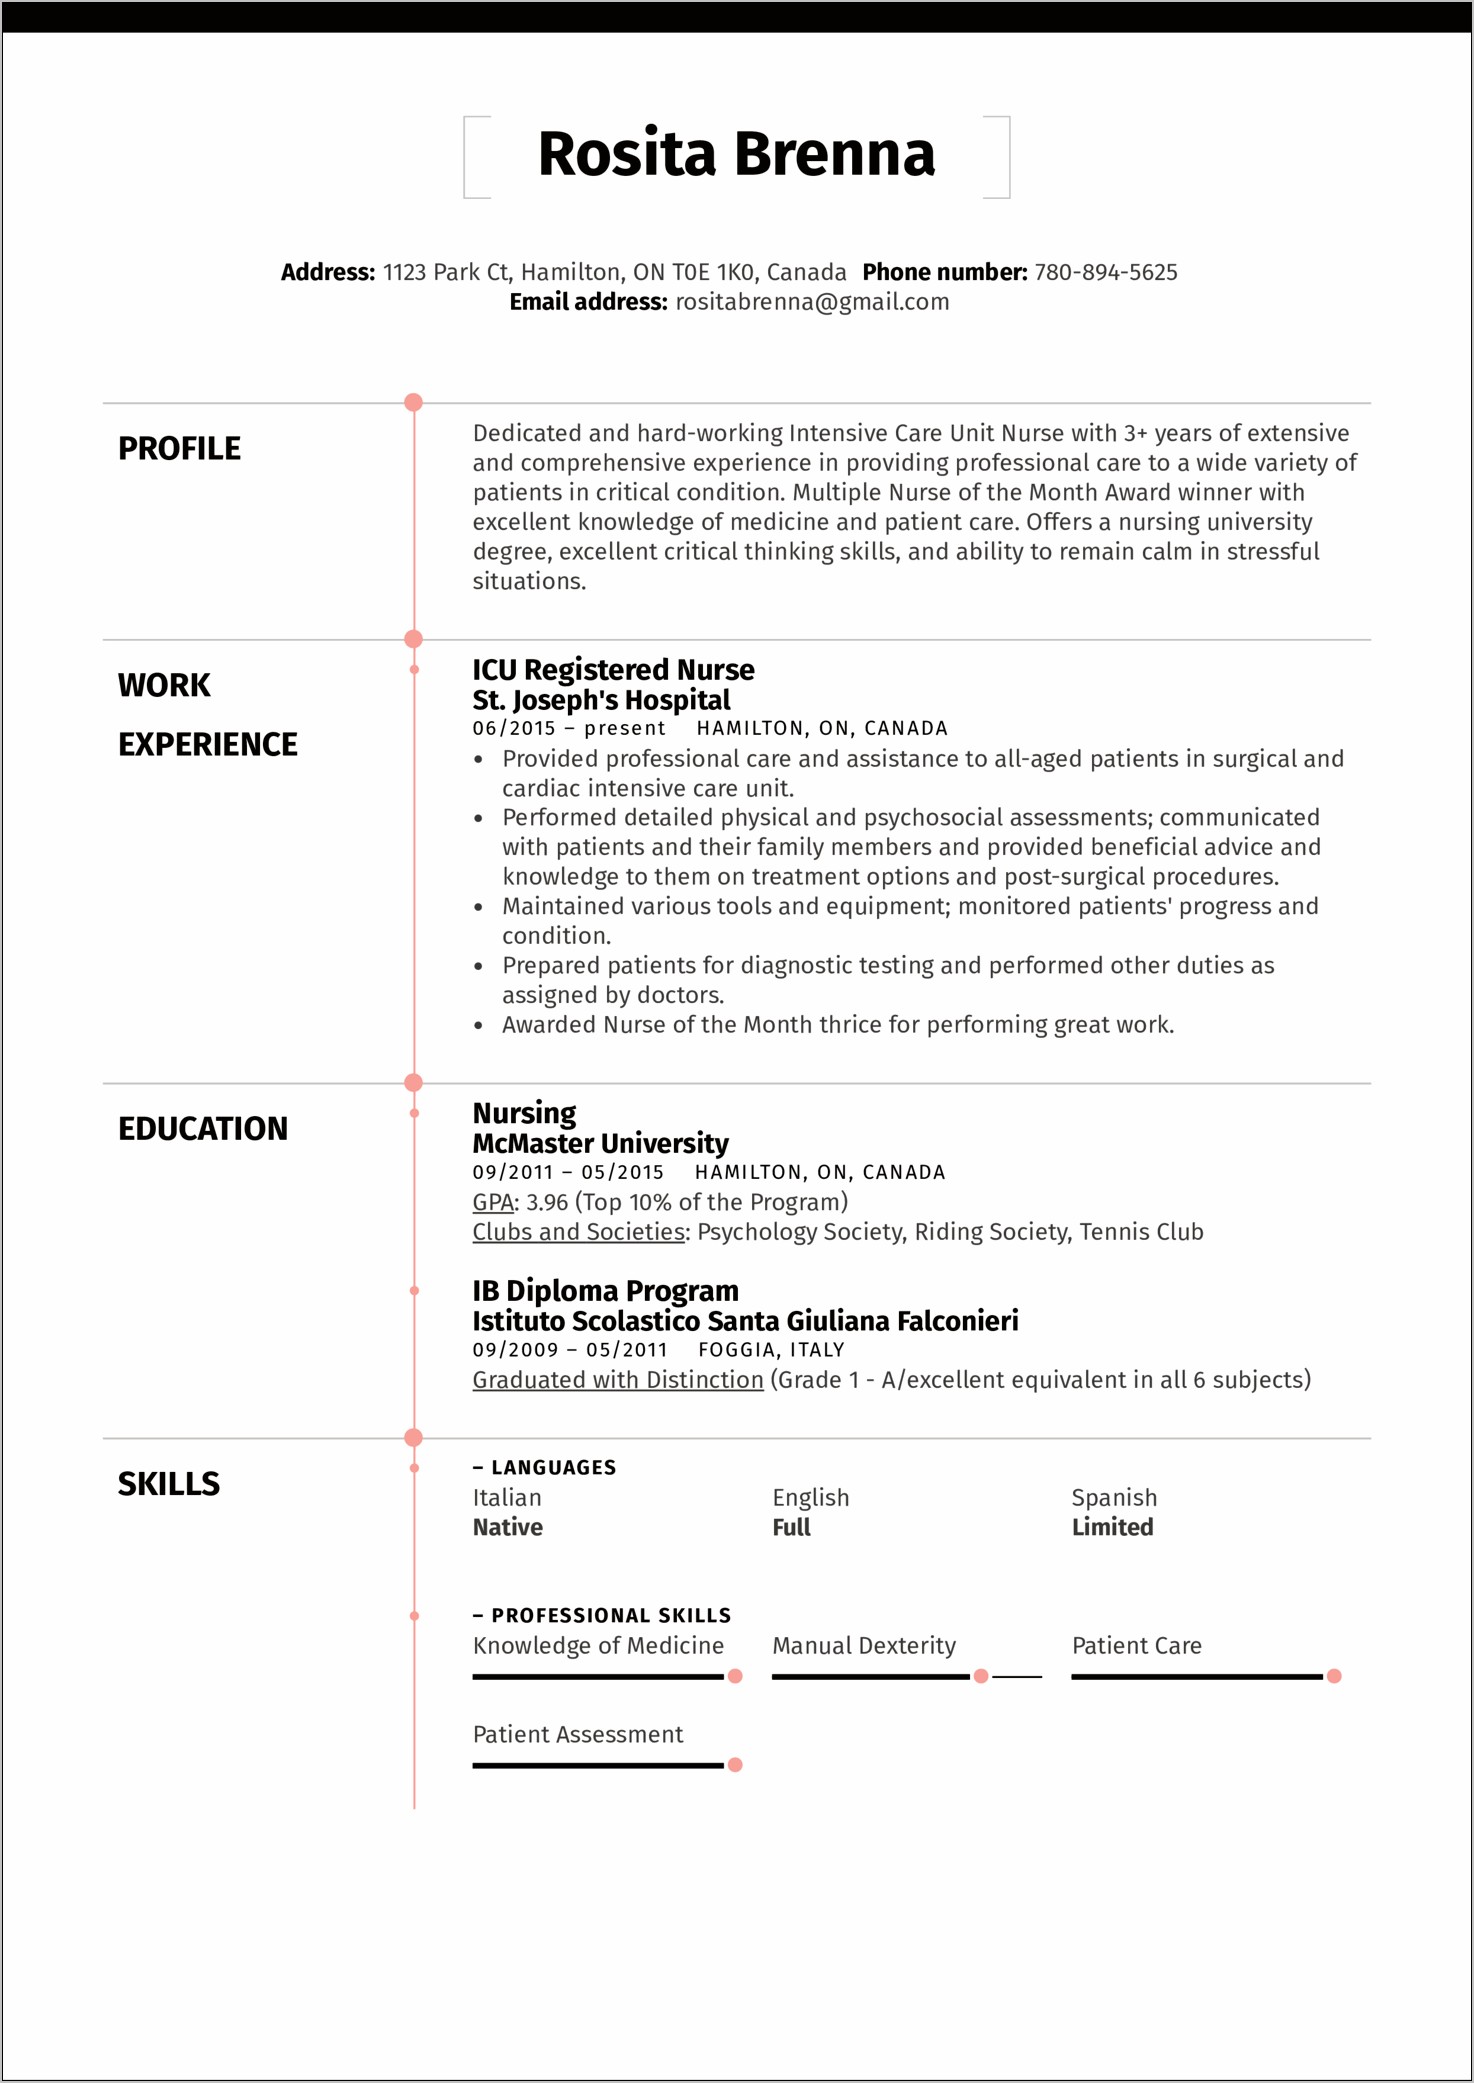 Resume Skills And Knowledge Examples